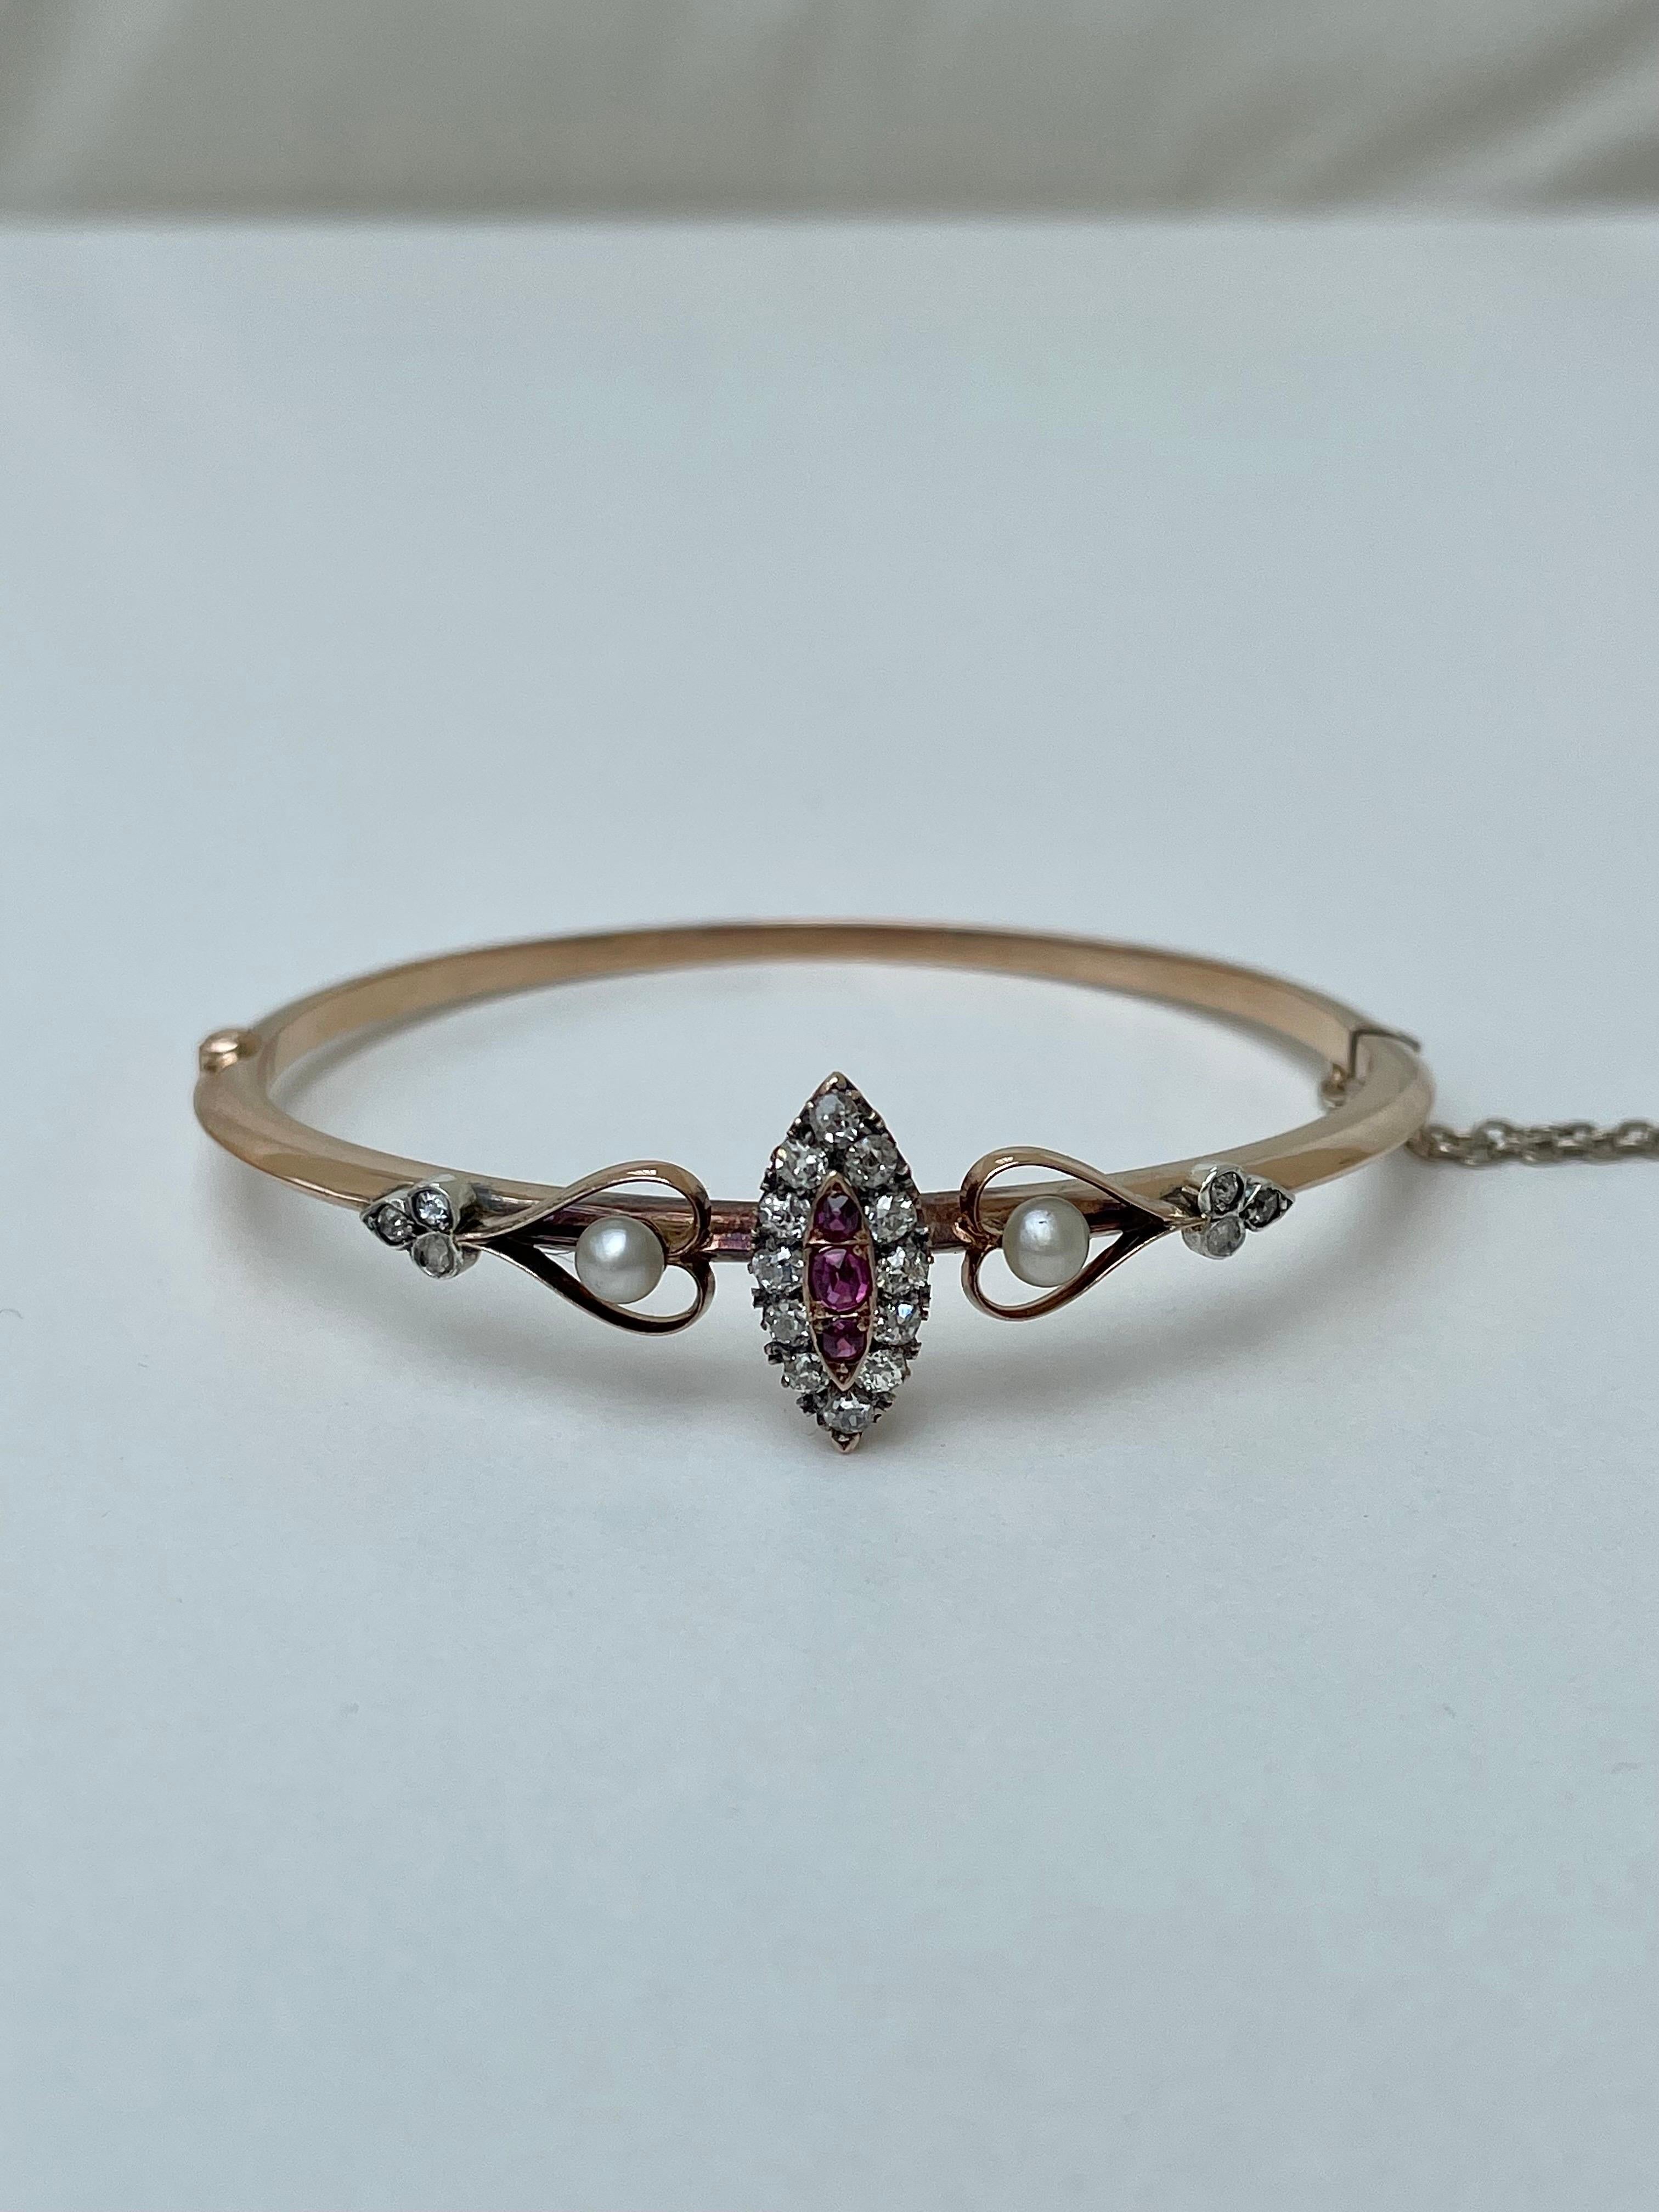 Antique Outstanding Ruby & Diamond Marquise Heart Yellow Gold Bangle Bracelet 

truly exquisite diamond and ruby bangle 

The item comes without the box in the photos but will be presented in a gift box

Measurements: weight 9.94g, inner diameter